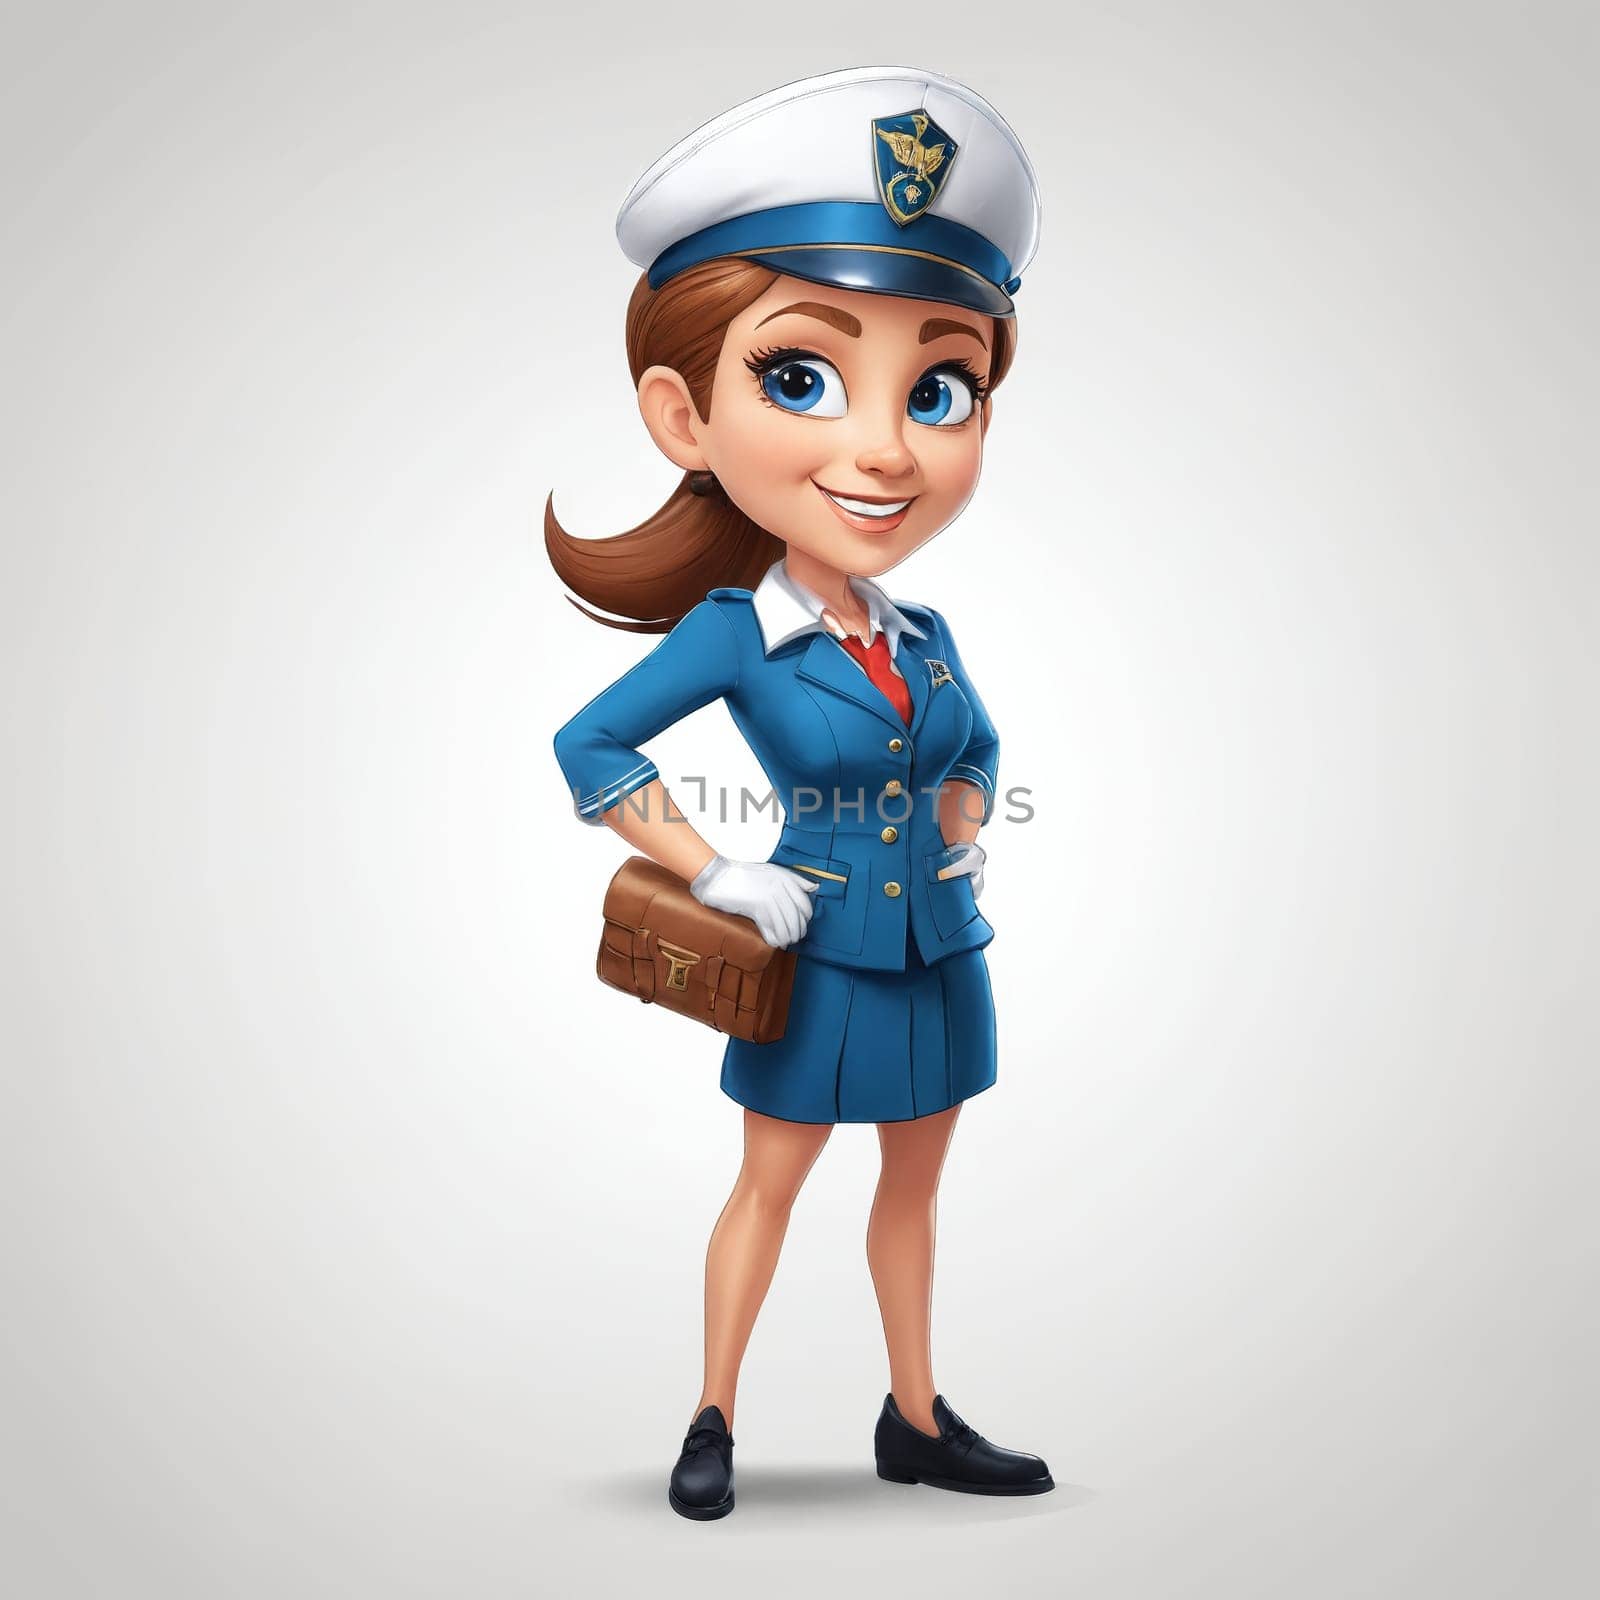 The image impeccably captures a confident female pilot, impeccably dressed in her formal attire, holding a briefcase - an embodiment of authority and expertise that comes with operating sky-high.